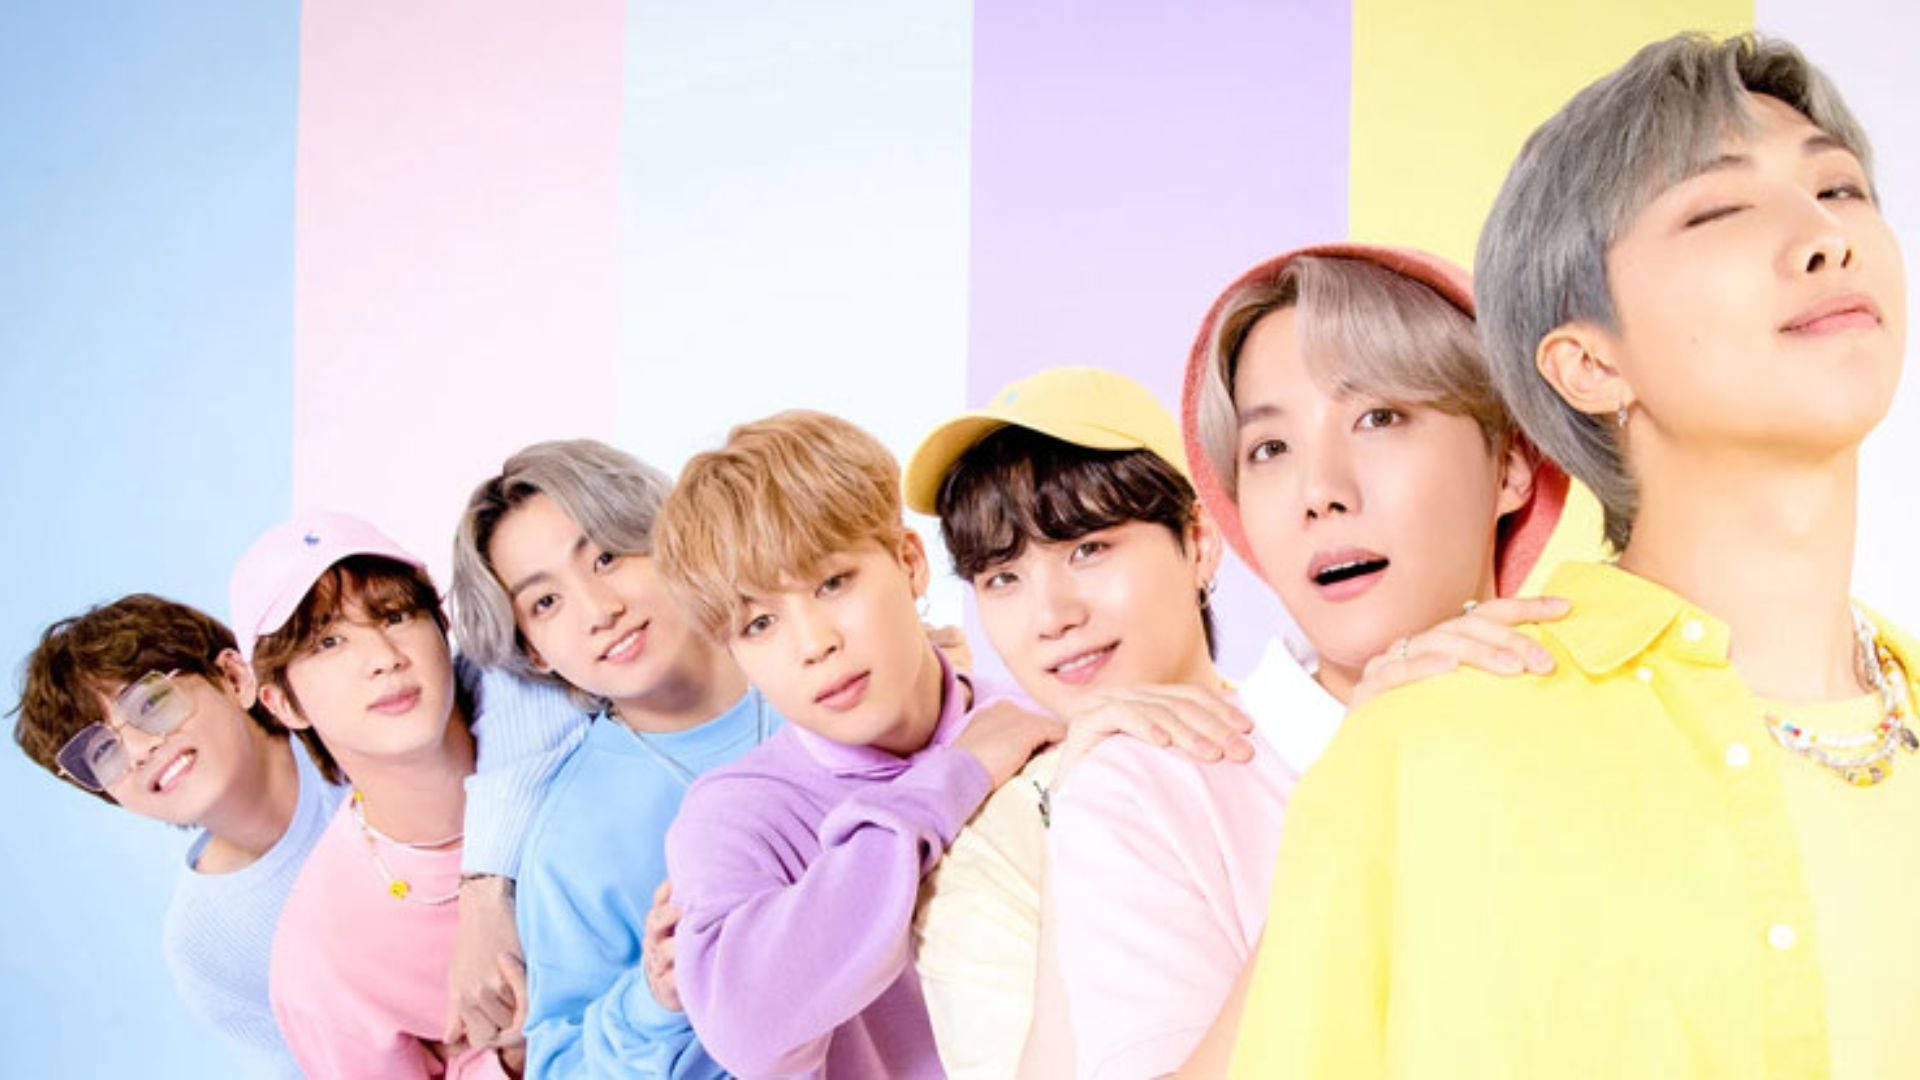 Pastel Outfit And Background Bts Cute Aesthetic